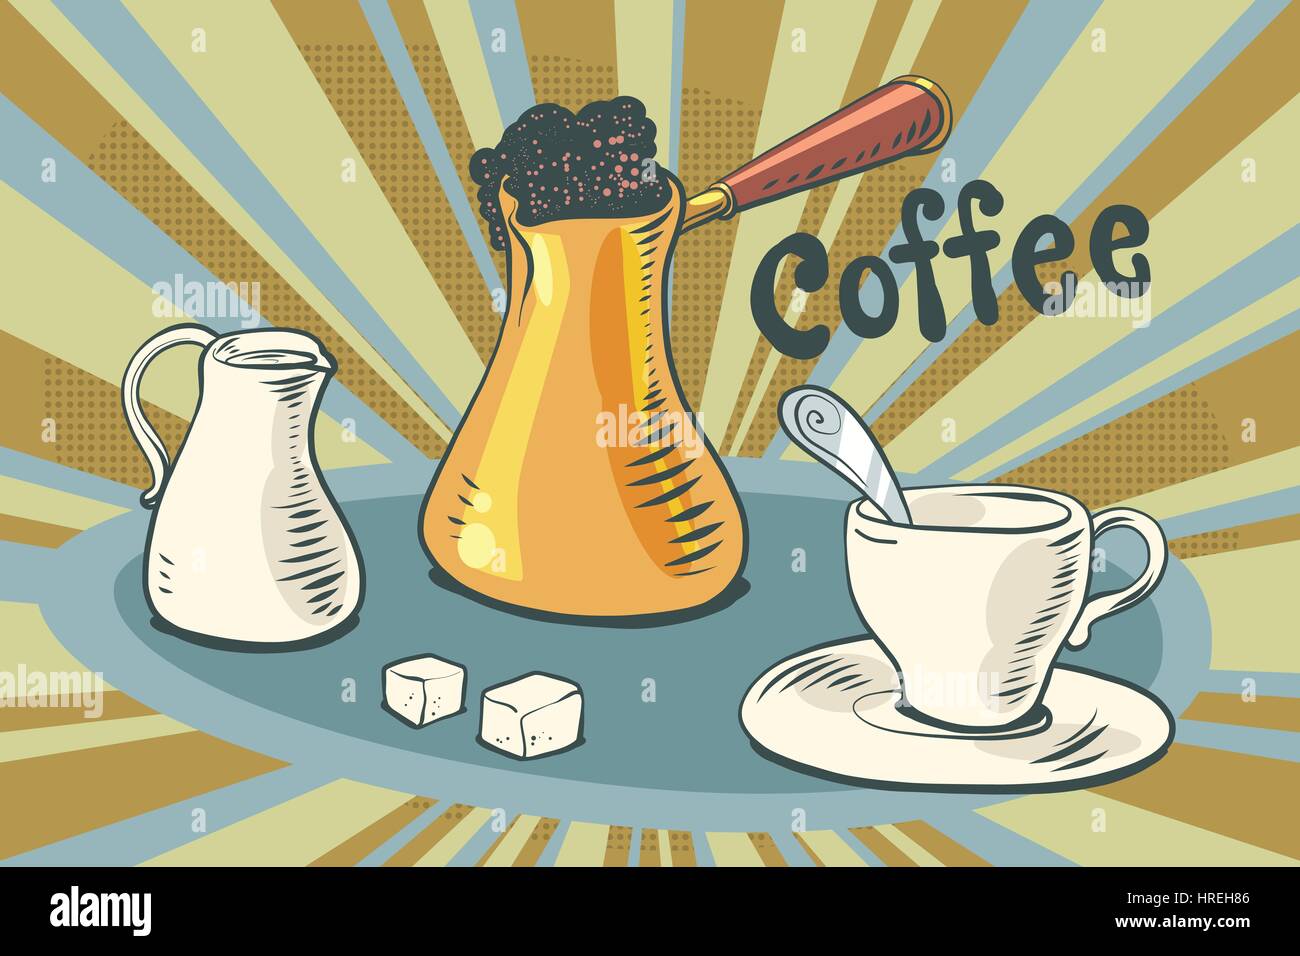 Hot coffee milk sugar and a Cup. Comic book vintage pop art retro style illustration vector. The cafeteria and cafes Stock Vector